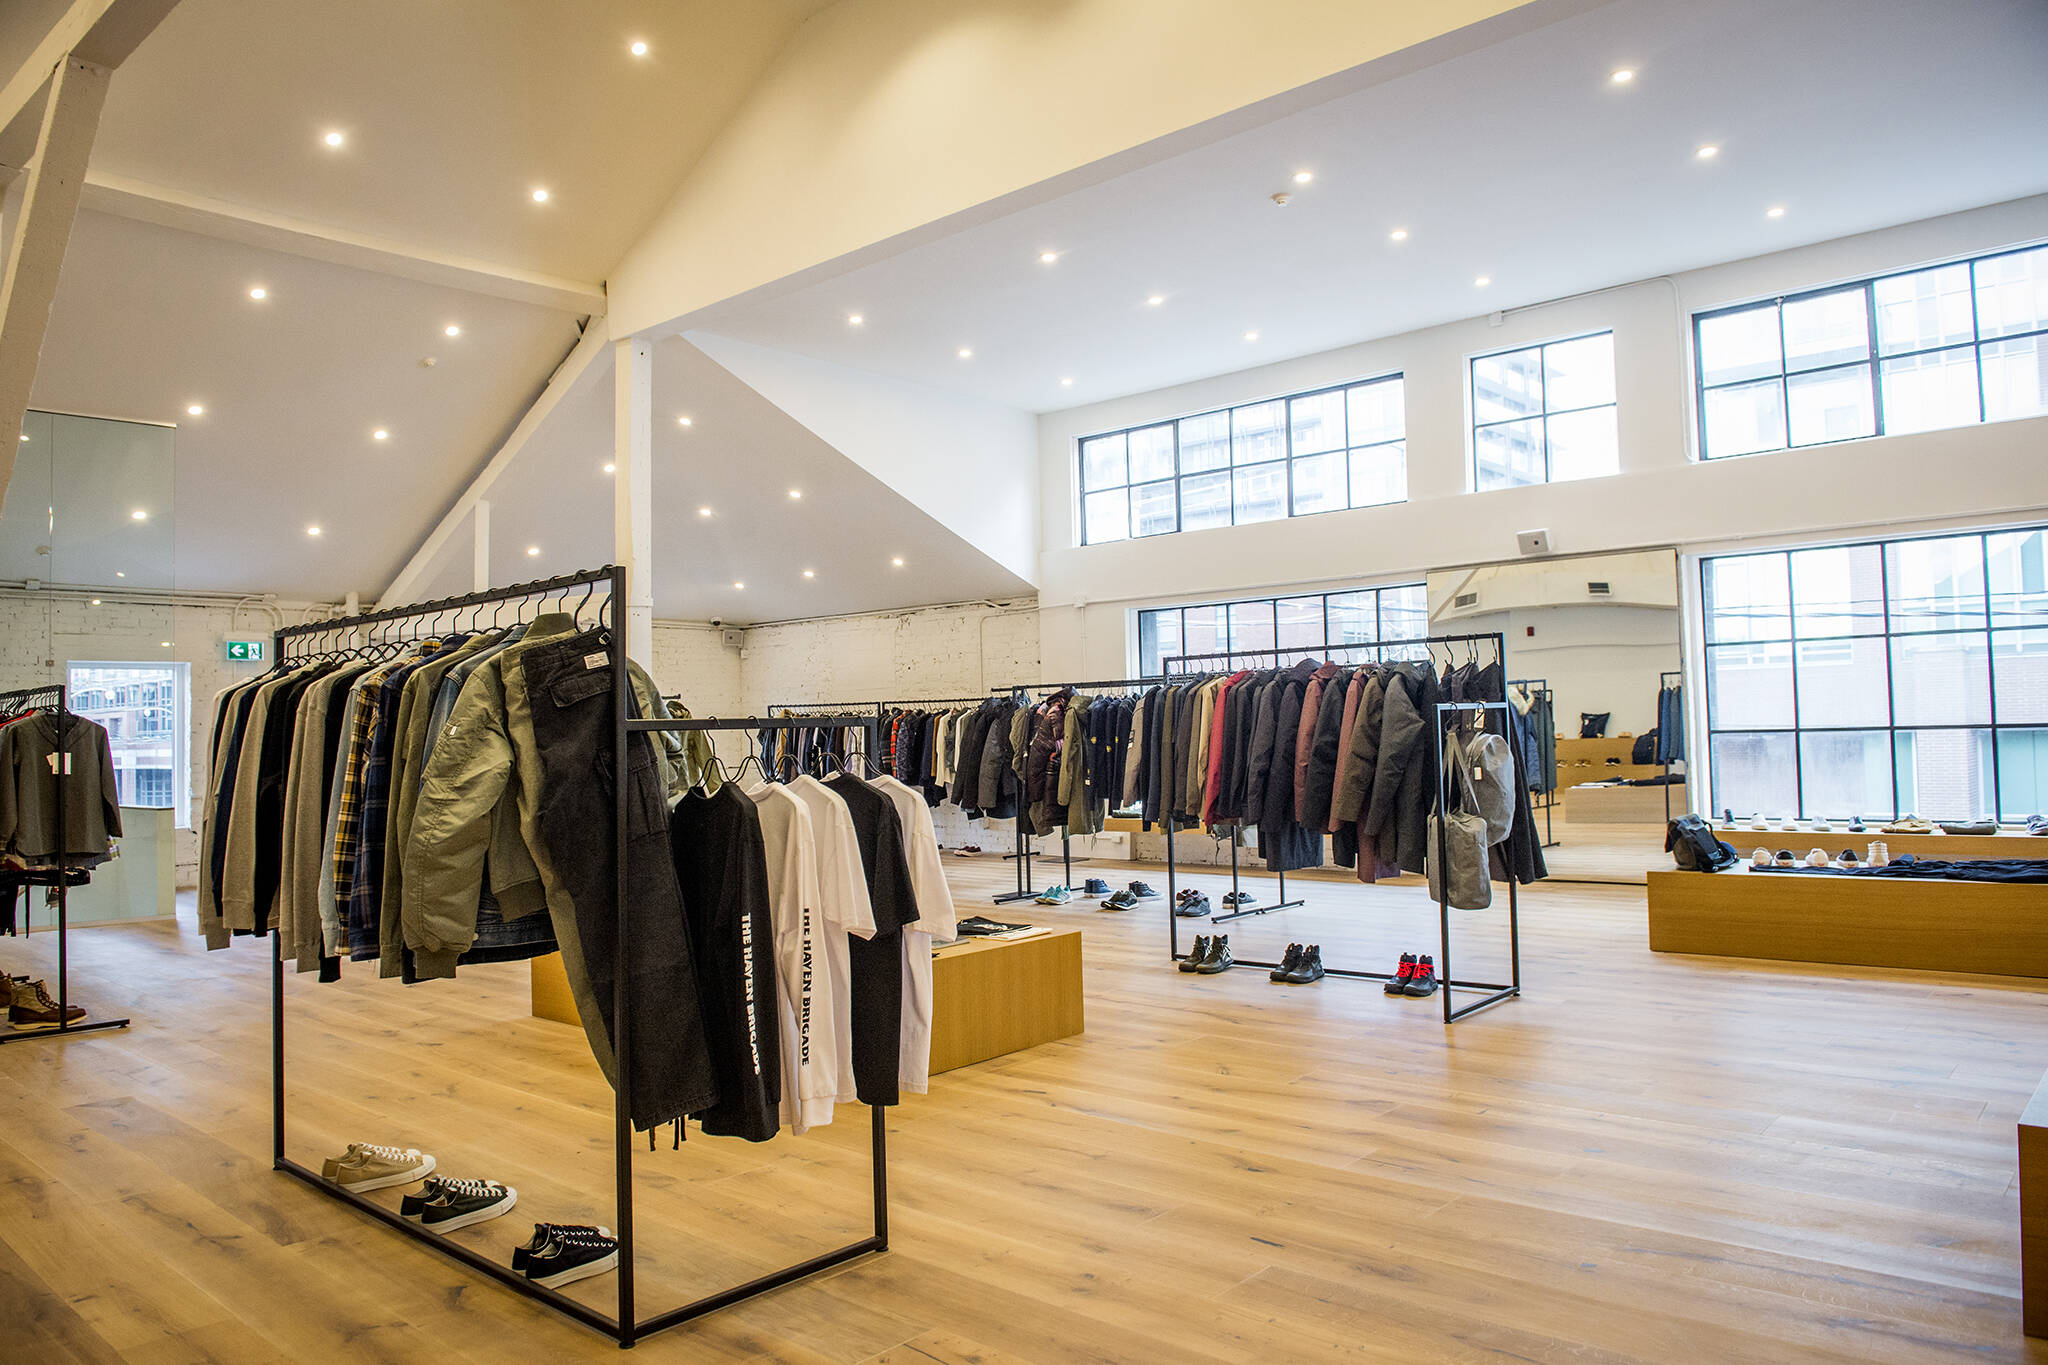 The Best Vintage Clothing Stores in Toronto